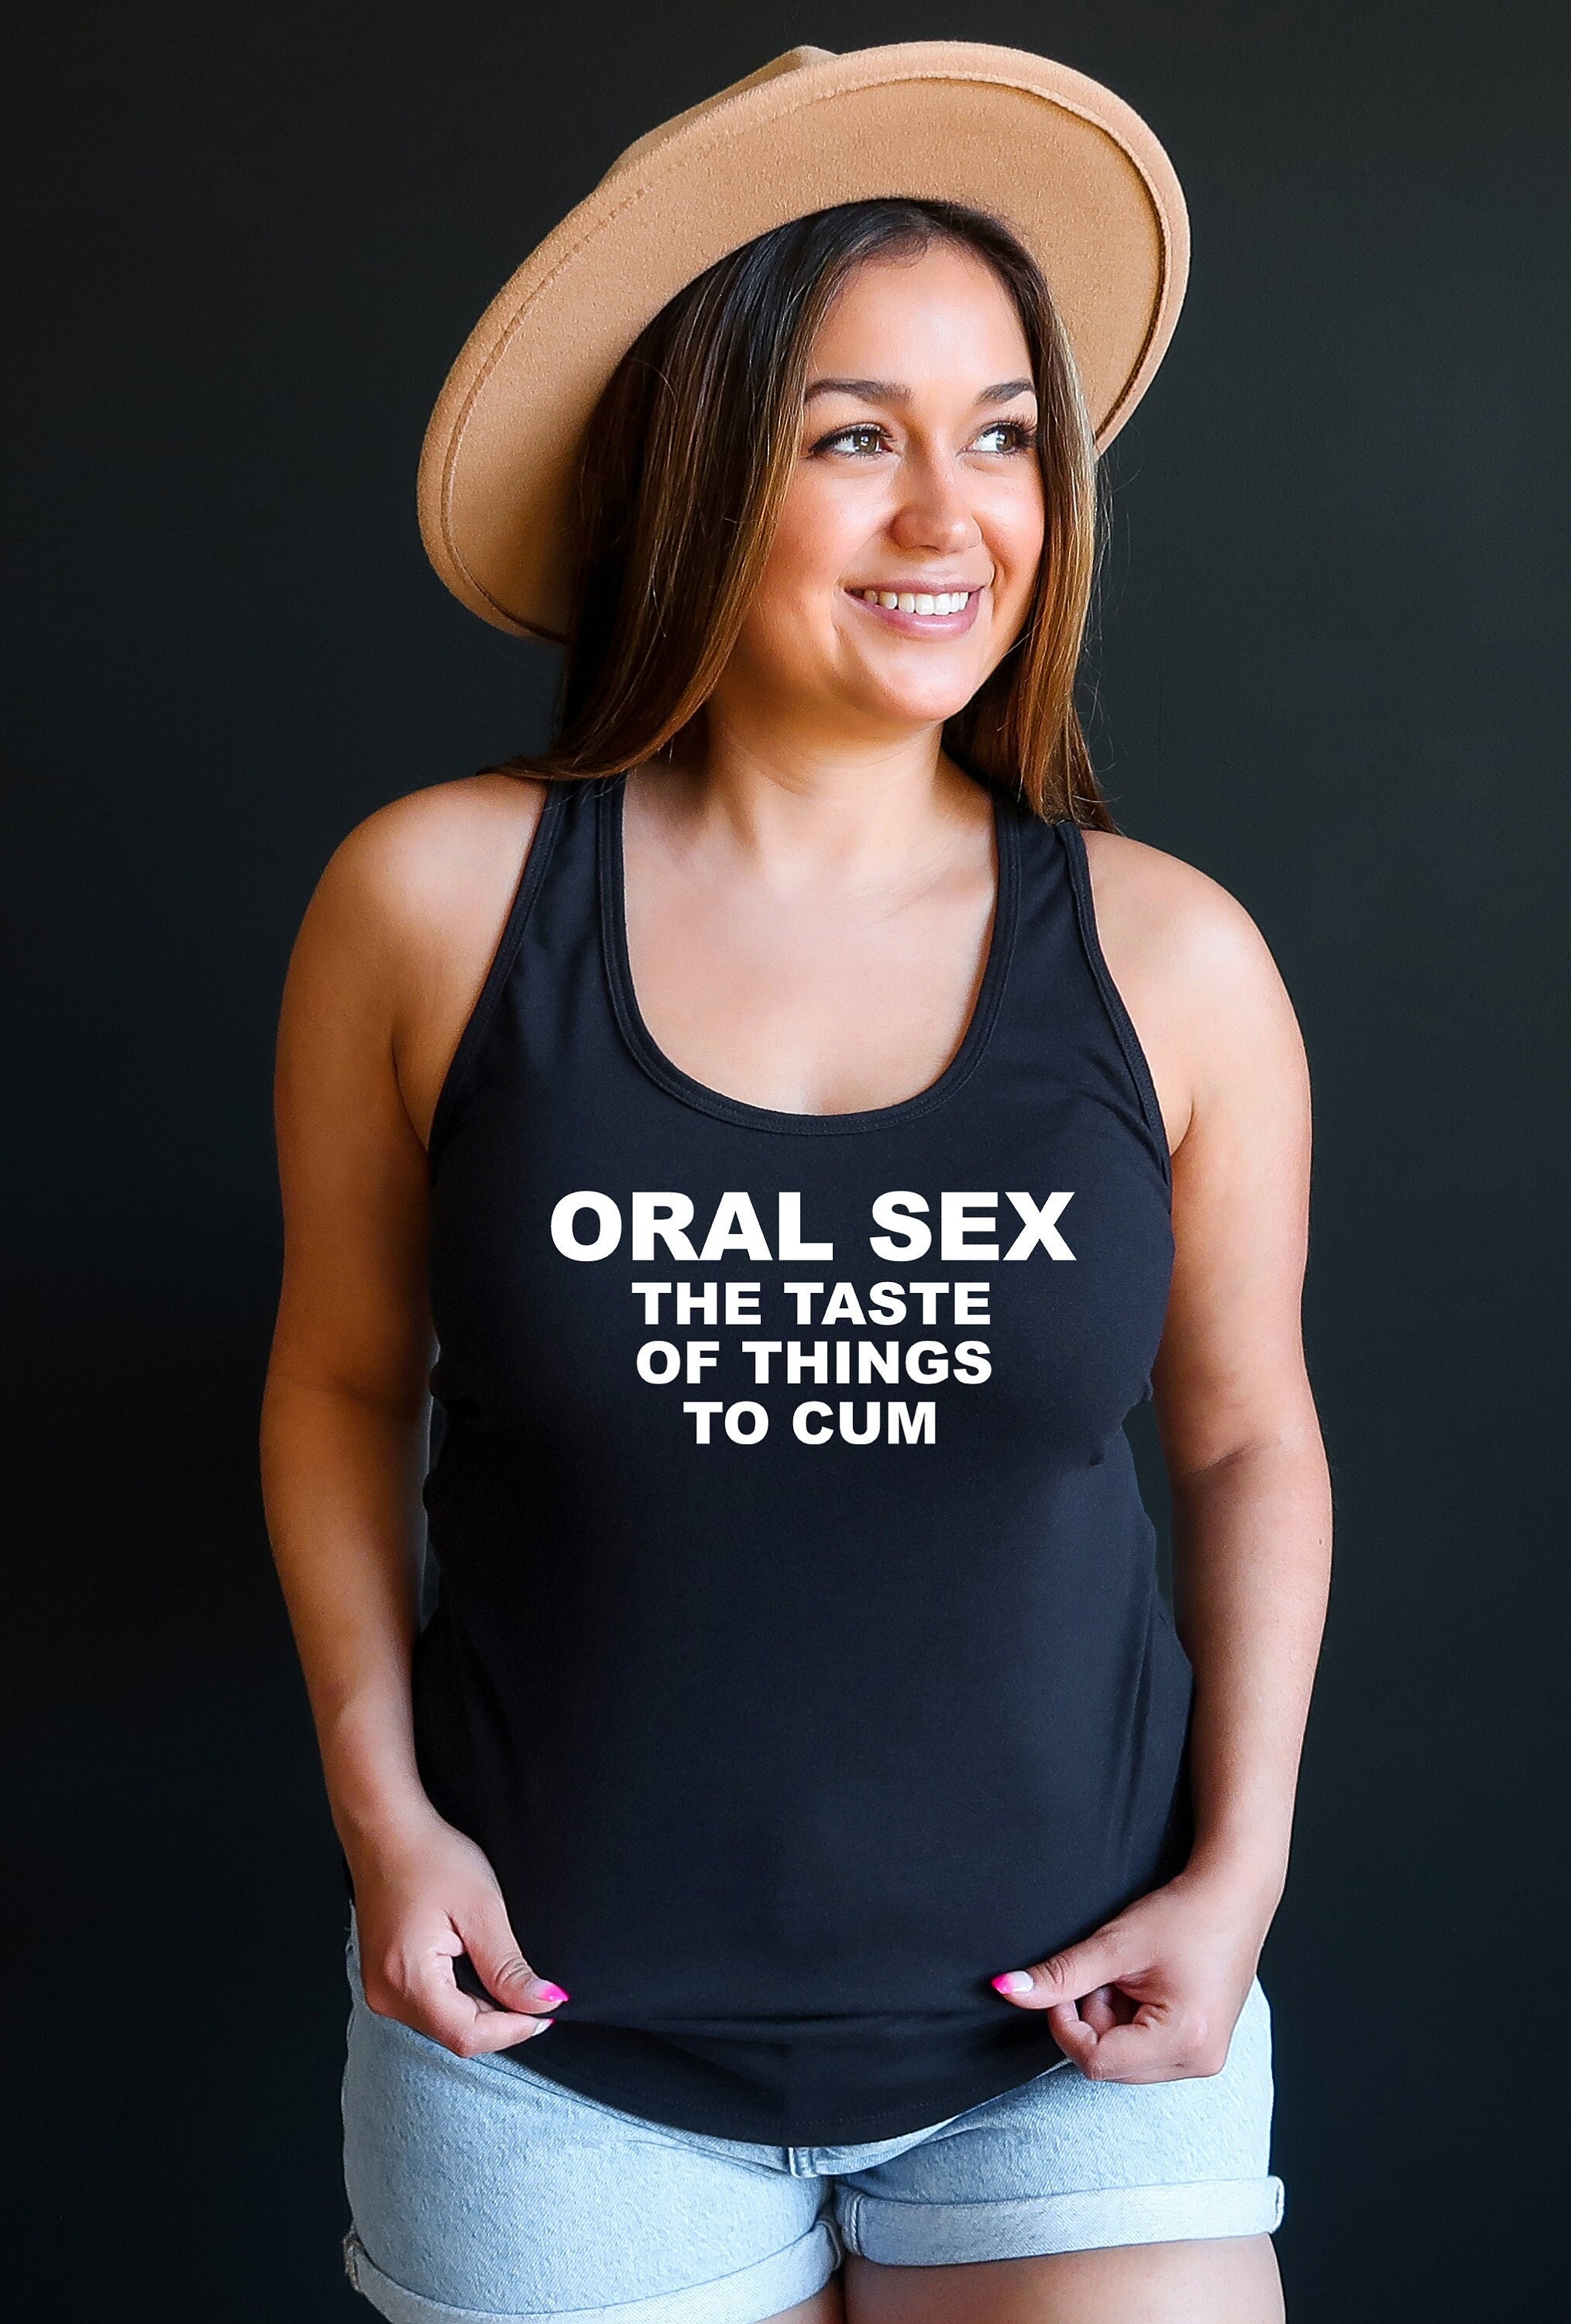 Oral Sex Shirt / Oral Sex the Taste of Things to Cum / BJ pic